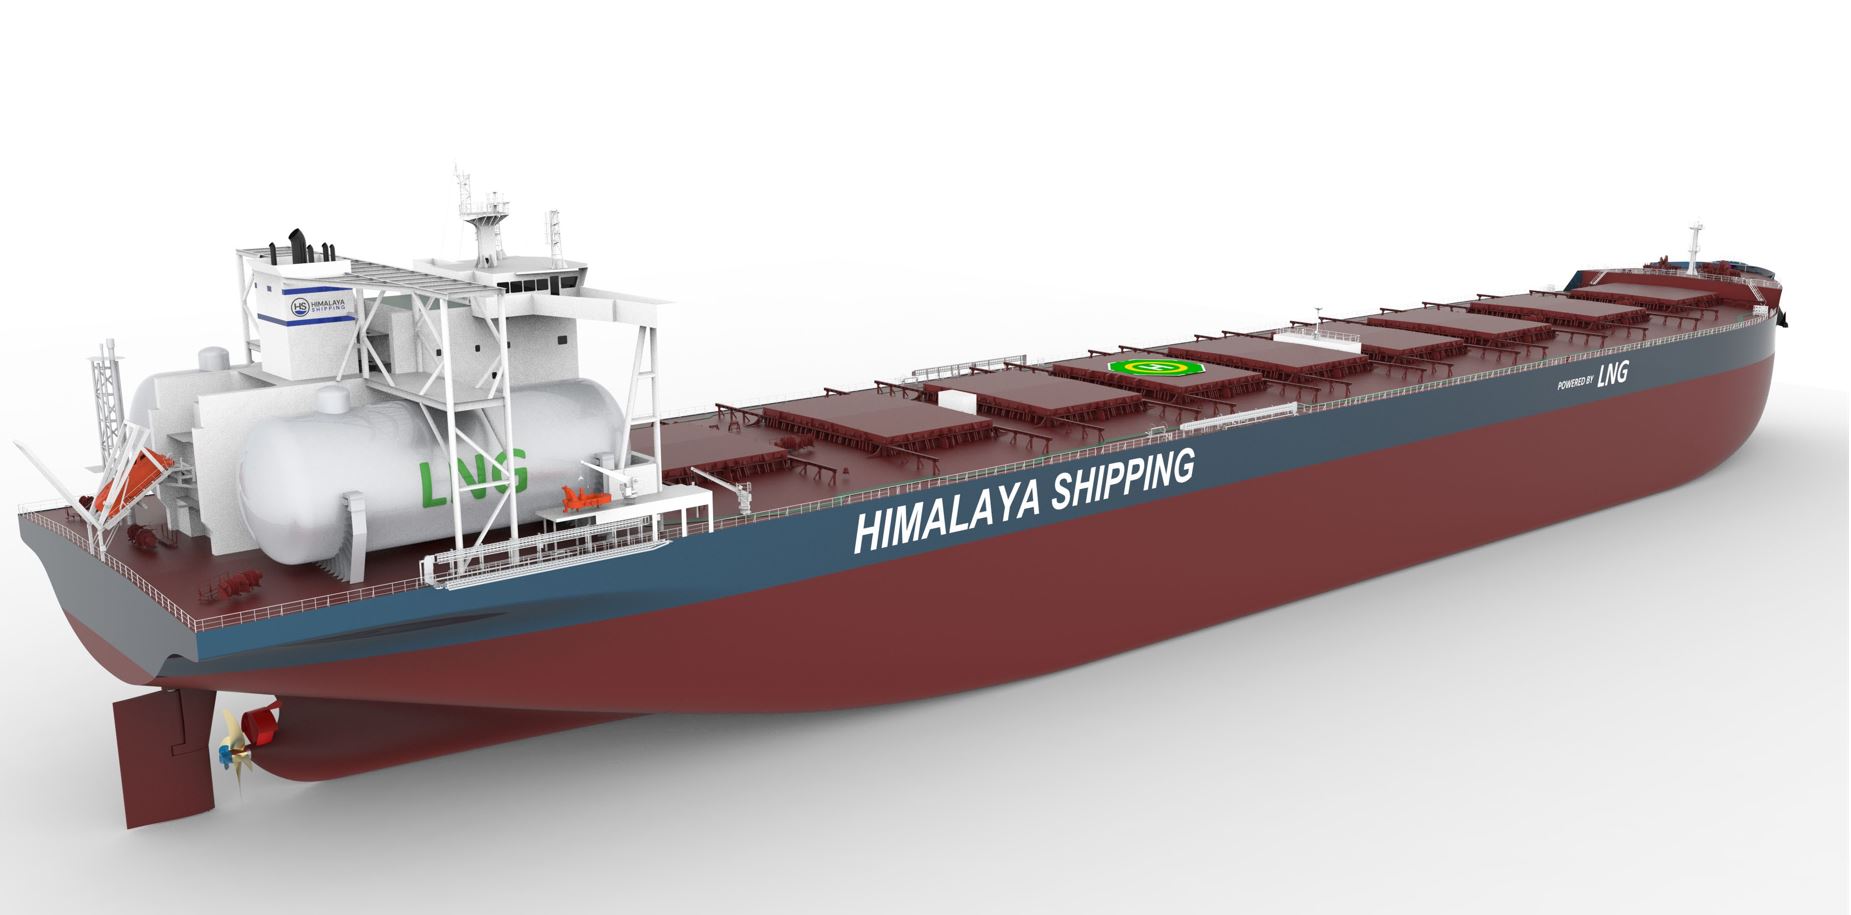 Himalaya Shipping's LNG-fueled bulkers still available for charter